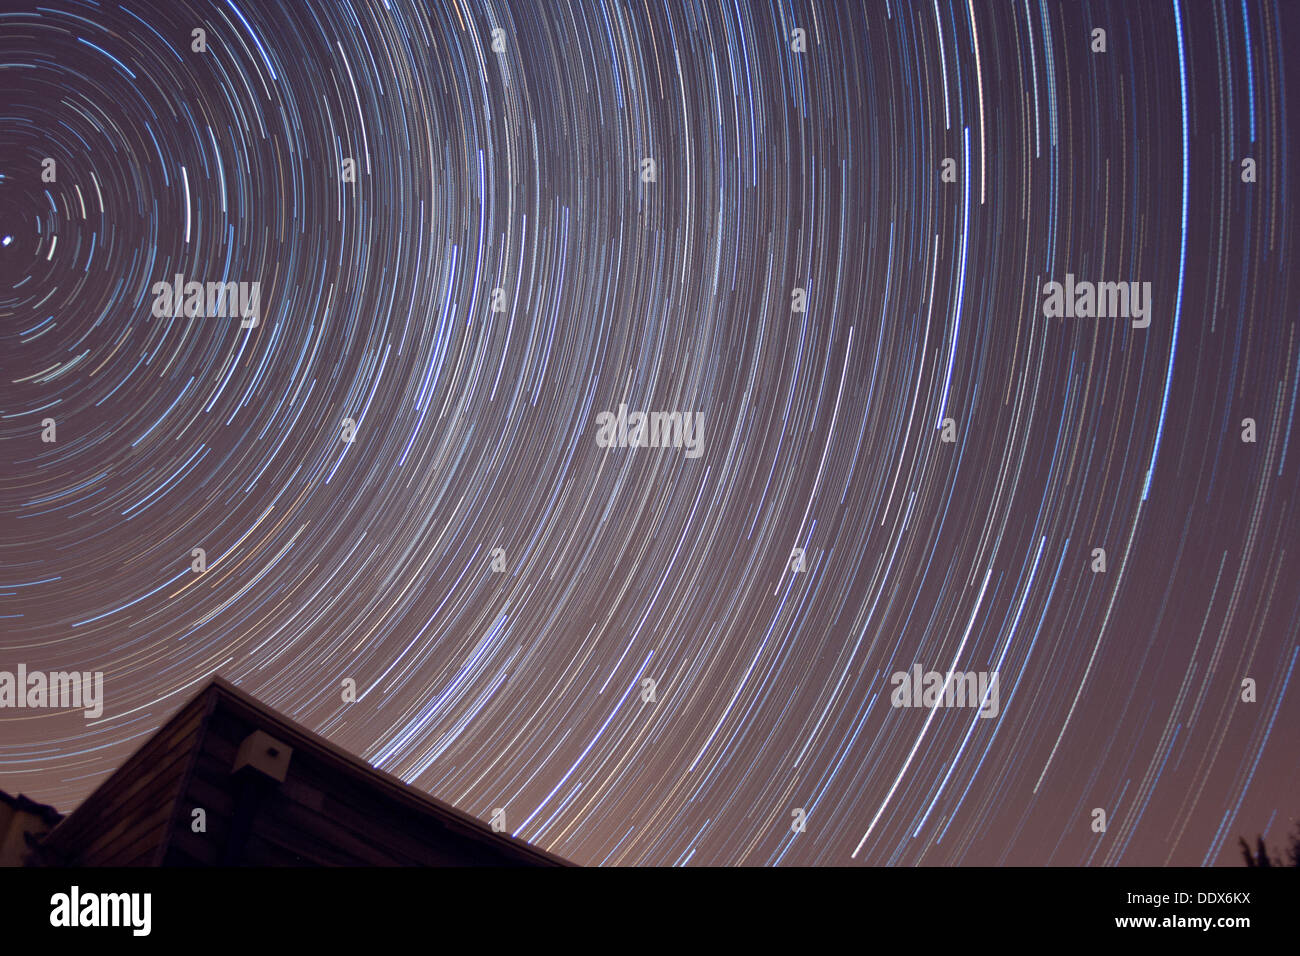 Star trails around Polaris, the North Pole Star in a 4hr exposure image Stock Photo